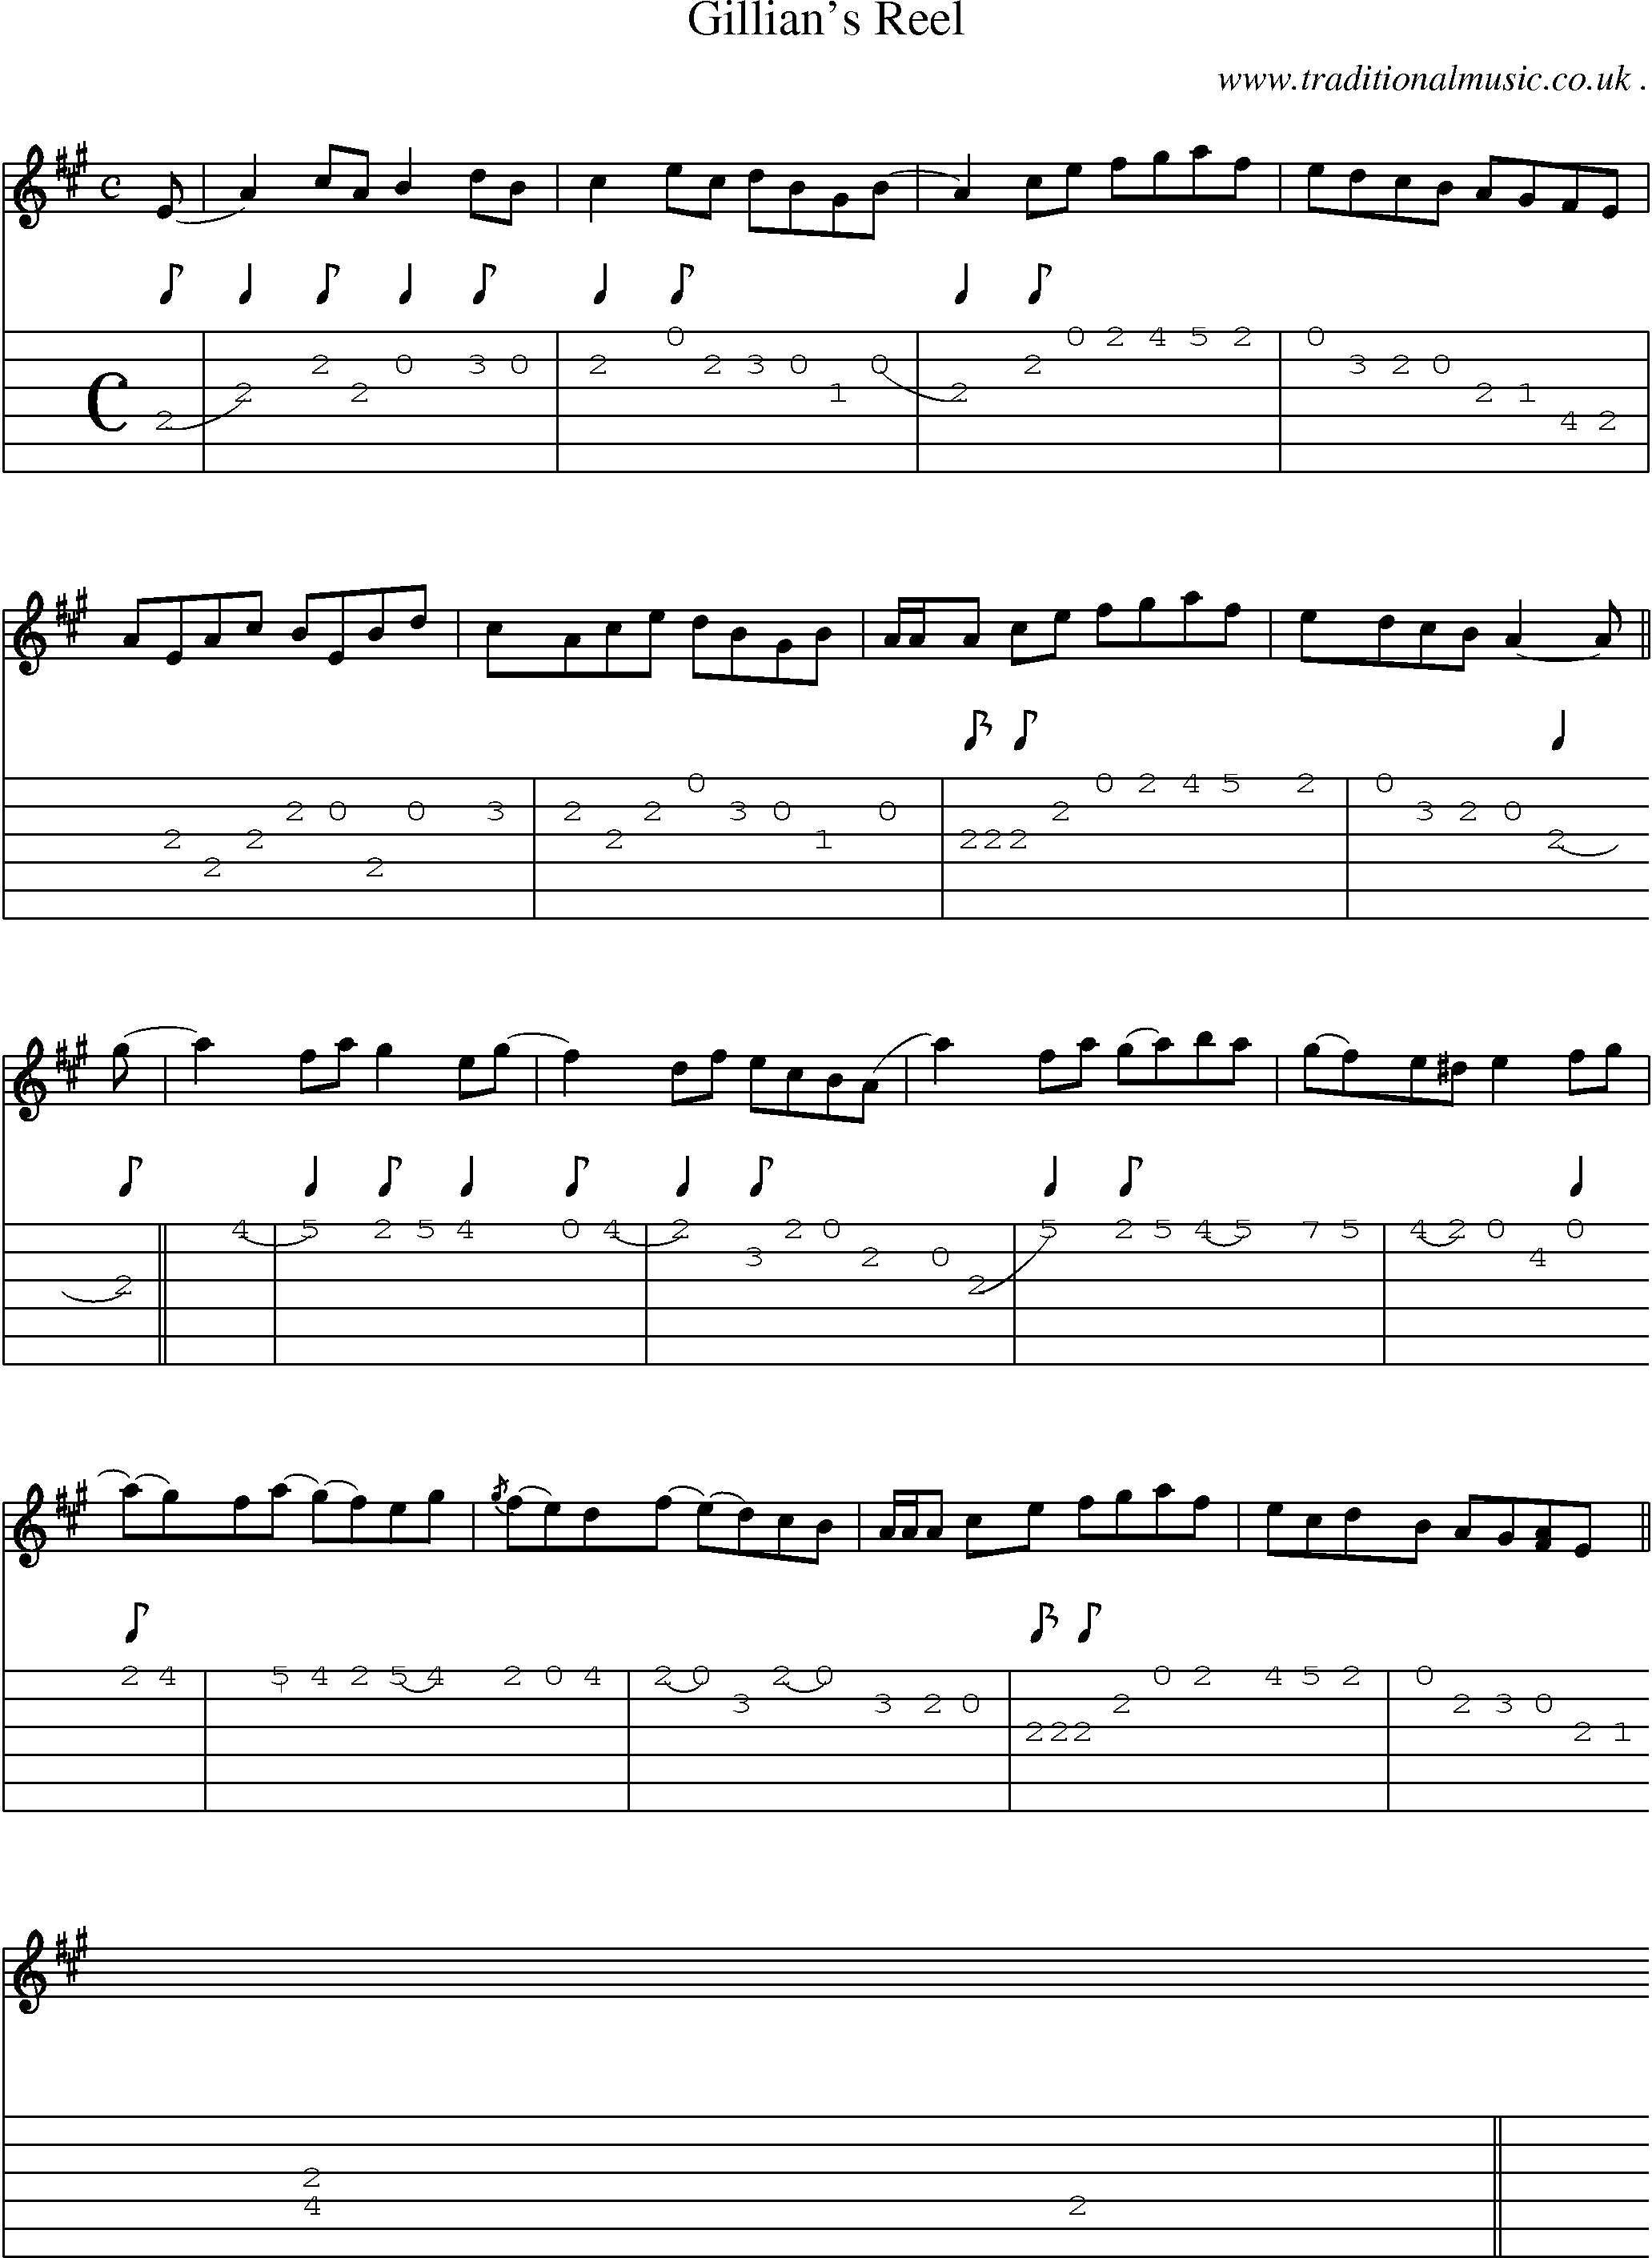 Sheet-music  score, Chords and Guitar Tabs for Gillians Reel